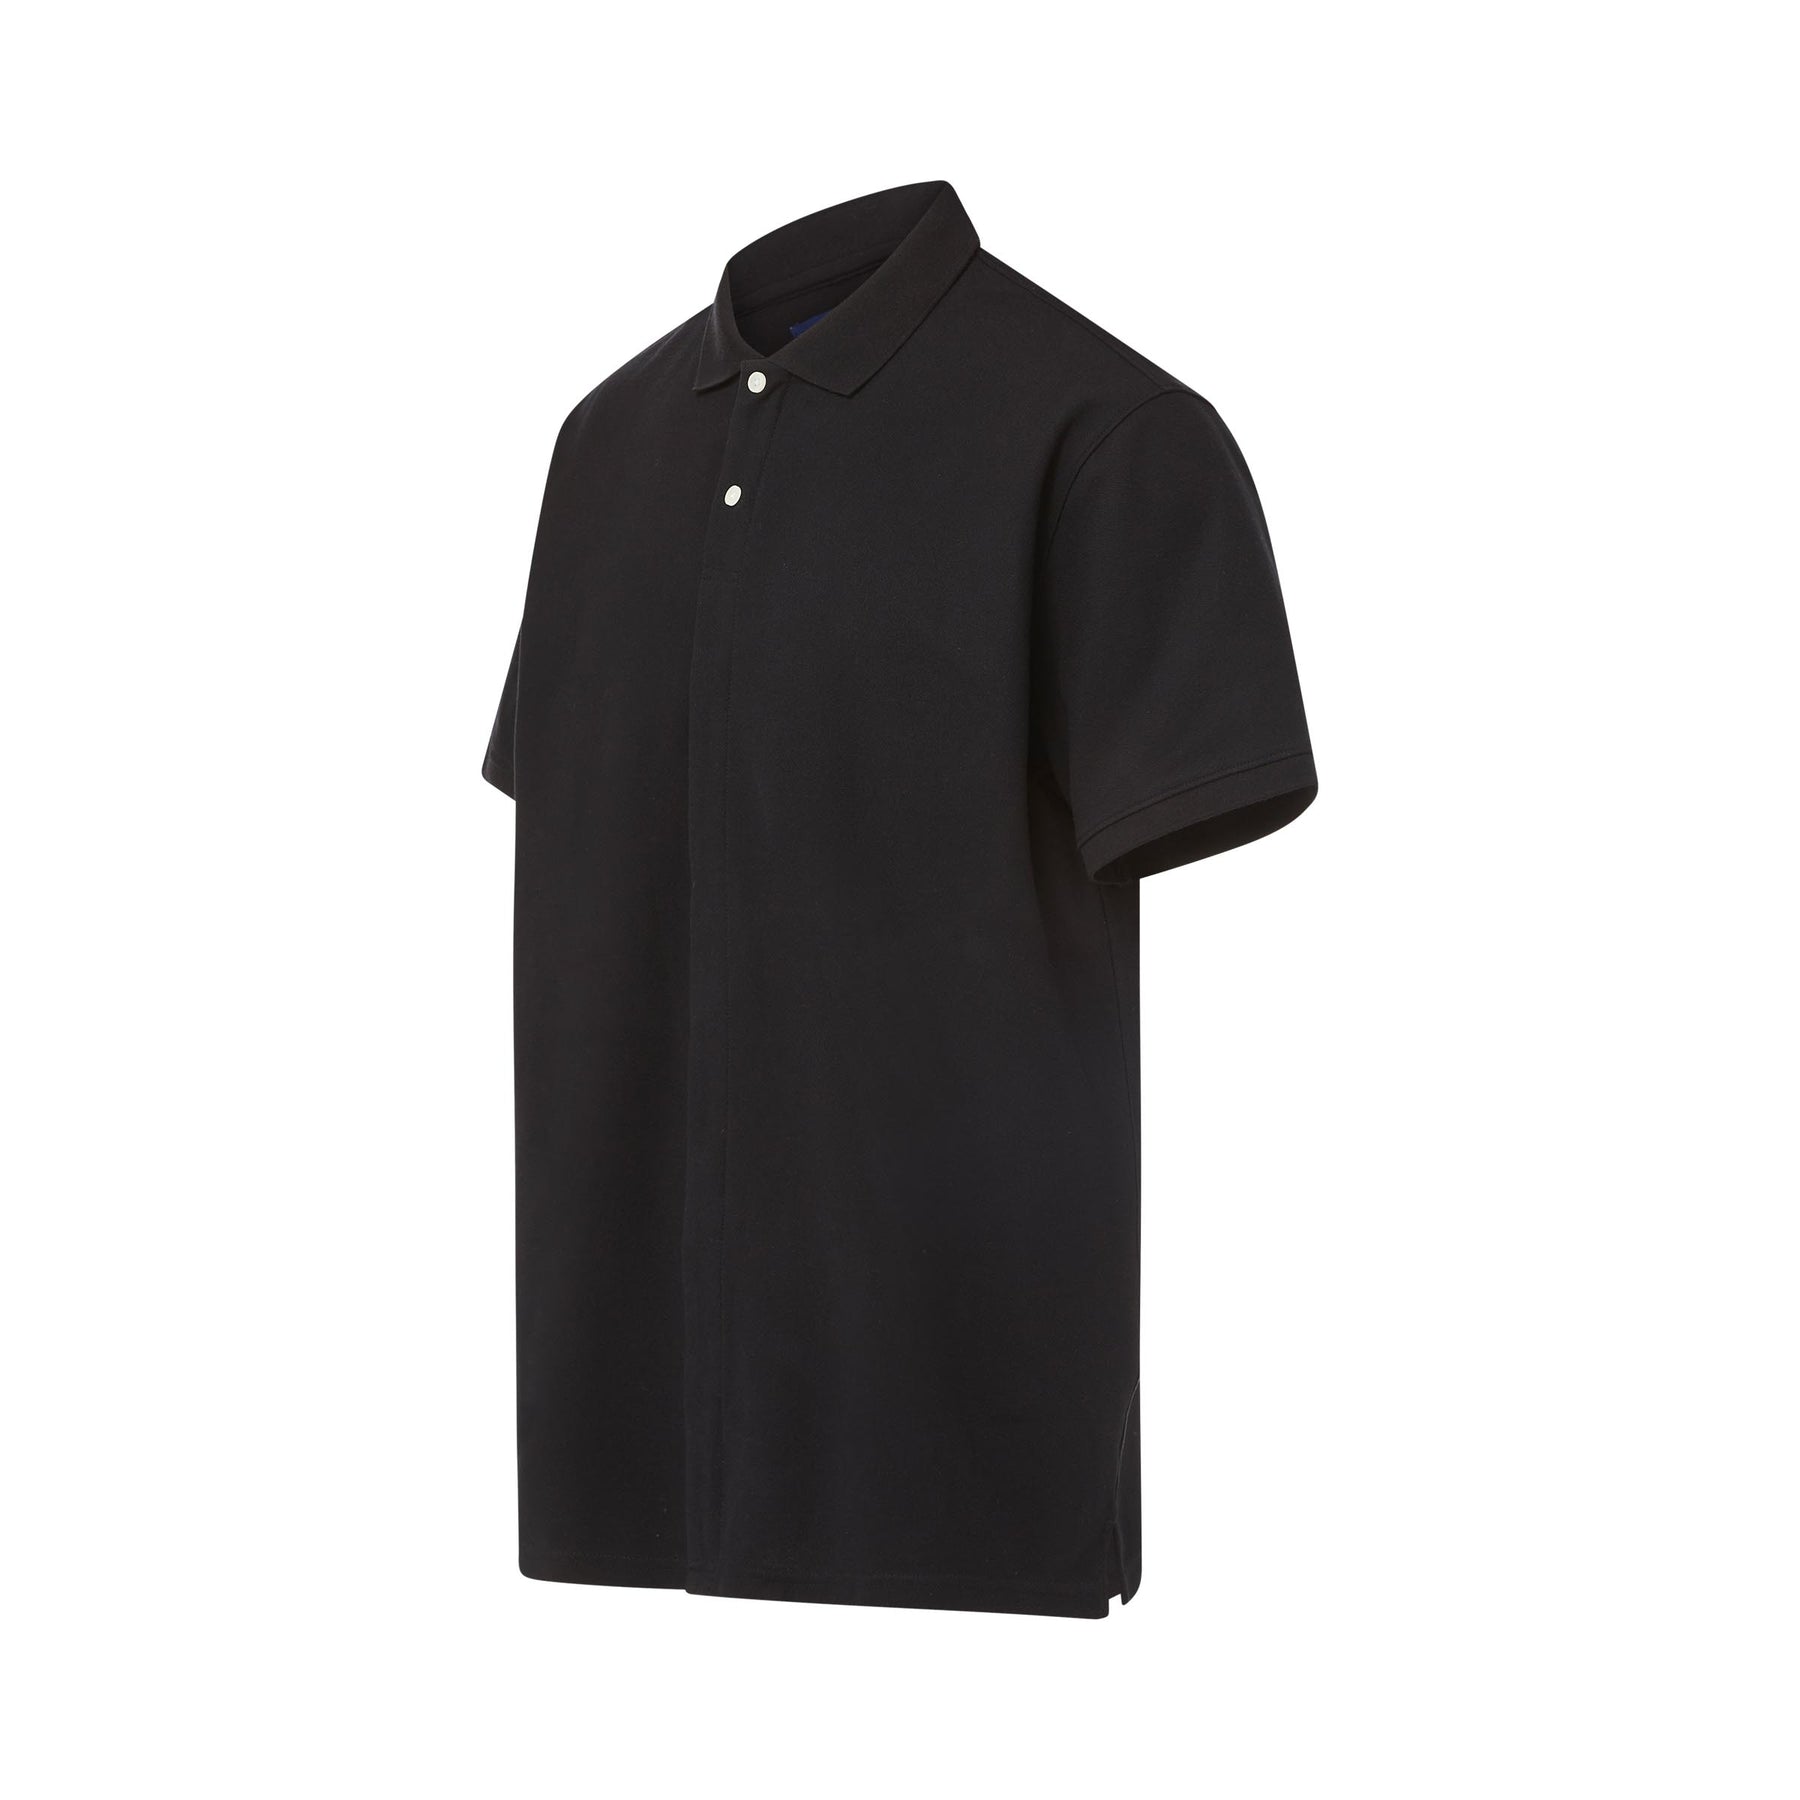 Black Pique Knit Short Sleeve Polo with Magnetic Closures